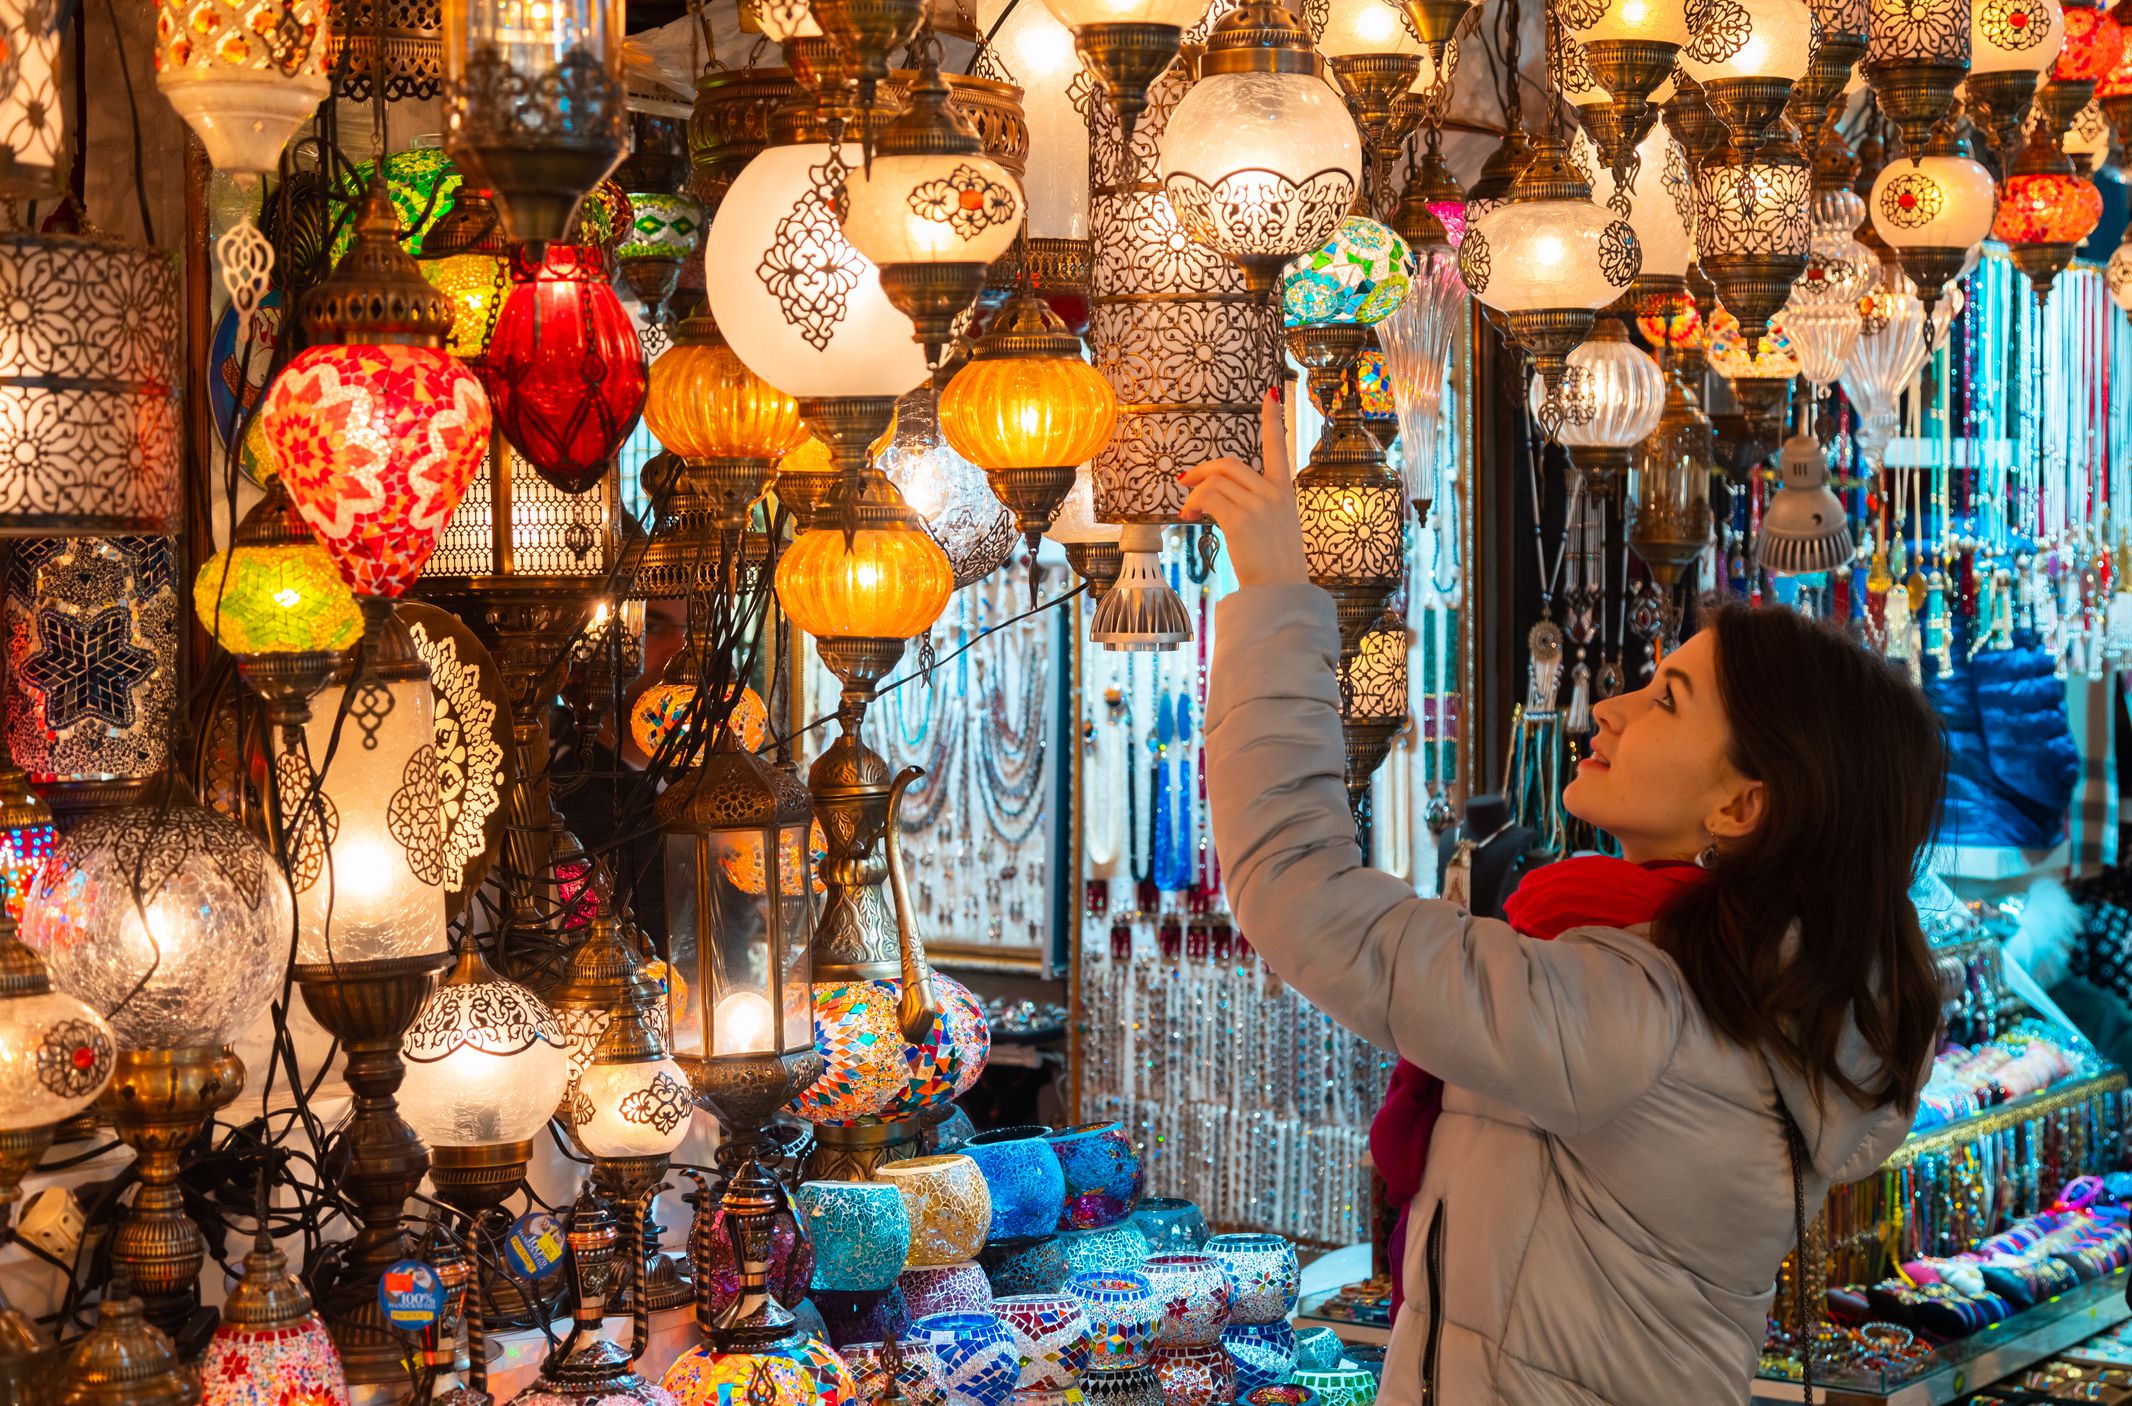 <p>Here’s some advice to help increase the odds that you souvenir-shop for items you’ll treasure for years to come:</p><ul><li>Research your destination’s signature products before you leave. If you’re heading to Venice, you might want to bring back a small glass pendant from Murano (the nearby “Glass Island”), where you can watch artisans at work; this has been a local tradition for centuries.</li><li>Set a souvenir budget and decide before you go what you want to bring back as a souvenir. This can help prevent you from overspending and blowing your budget in the moment.</li><li>Think small, and look for products that are locally and ethically sourced.</li><li>Another idea is to pick a theme for your souvenirs (inexpensive bracelets or bumper stickers), or use a <a href="https://www.sofi.com/learn/content/how-do-travel-credit-cards-work/">travel credit card</a> or cash back rewards credit card for your purchases that can reward you for spending.</li></ul>